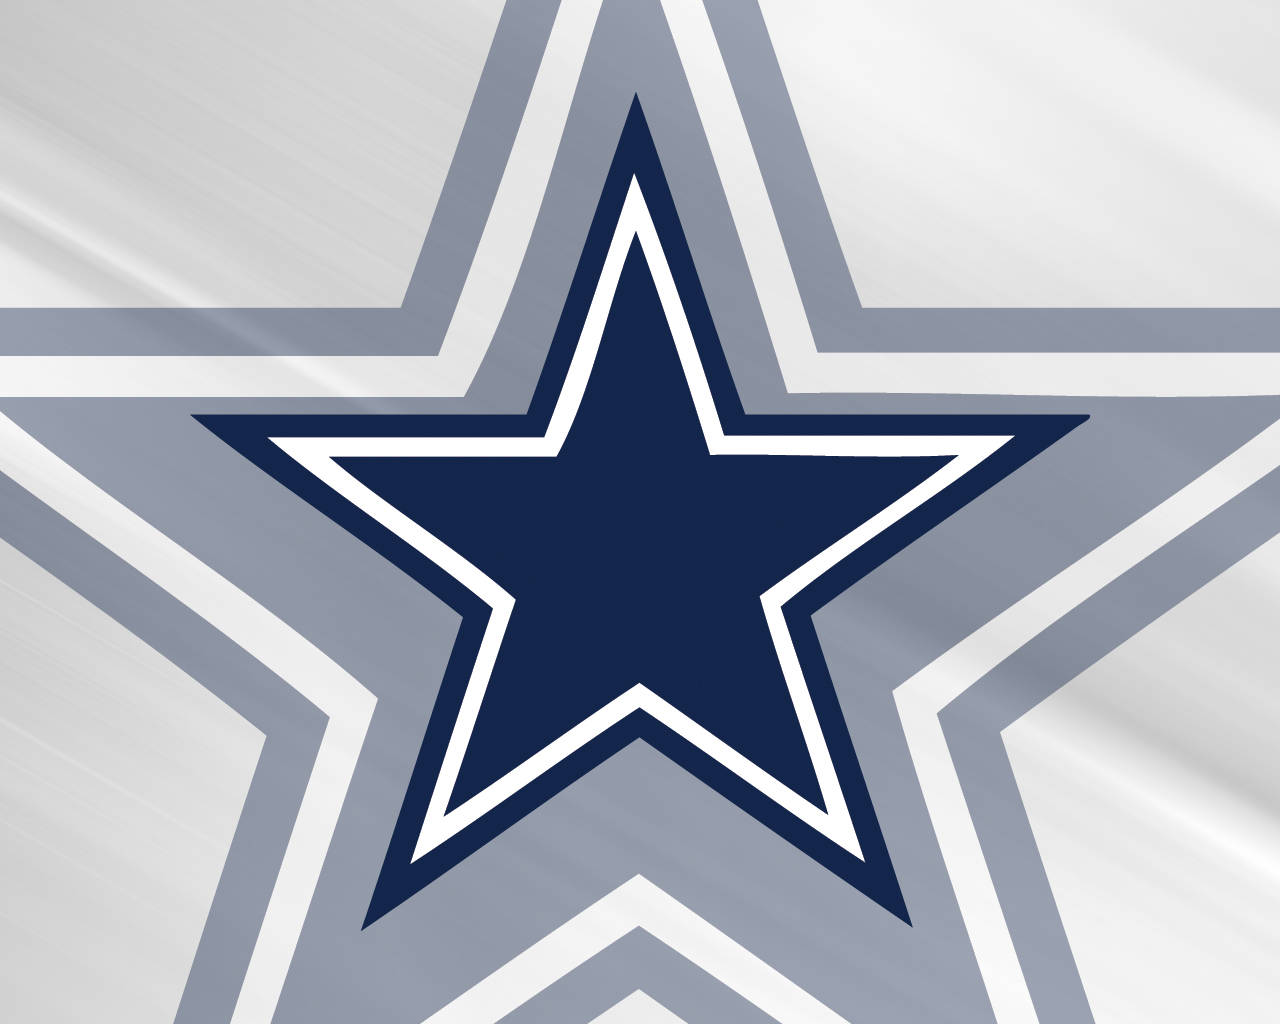 Dallas Cowboys Translucent And Solid Star Wallpaper